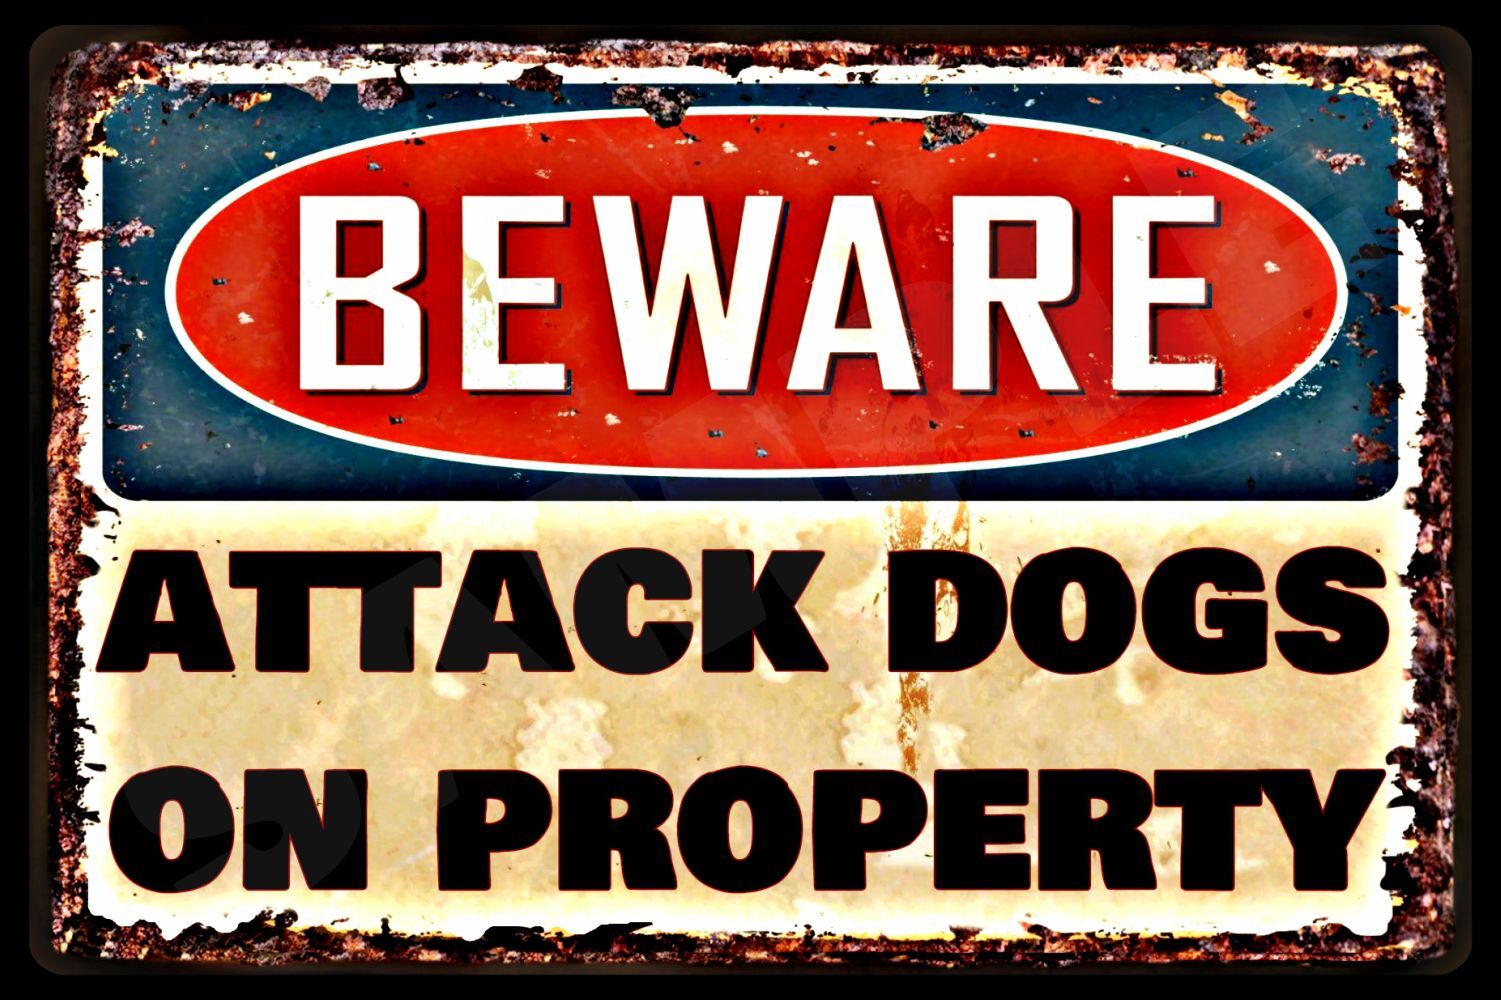 BEWARE ATTACK DOGS 8X12 ALL WEATHER METAL SIGN NO TRESPASSING PRIVATE PROPERTY